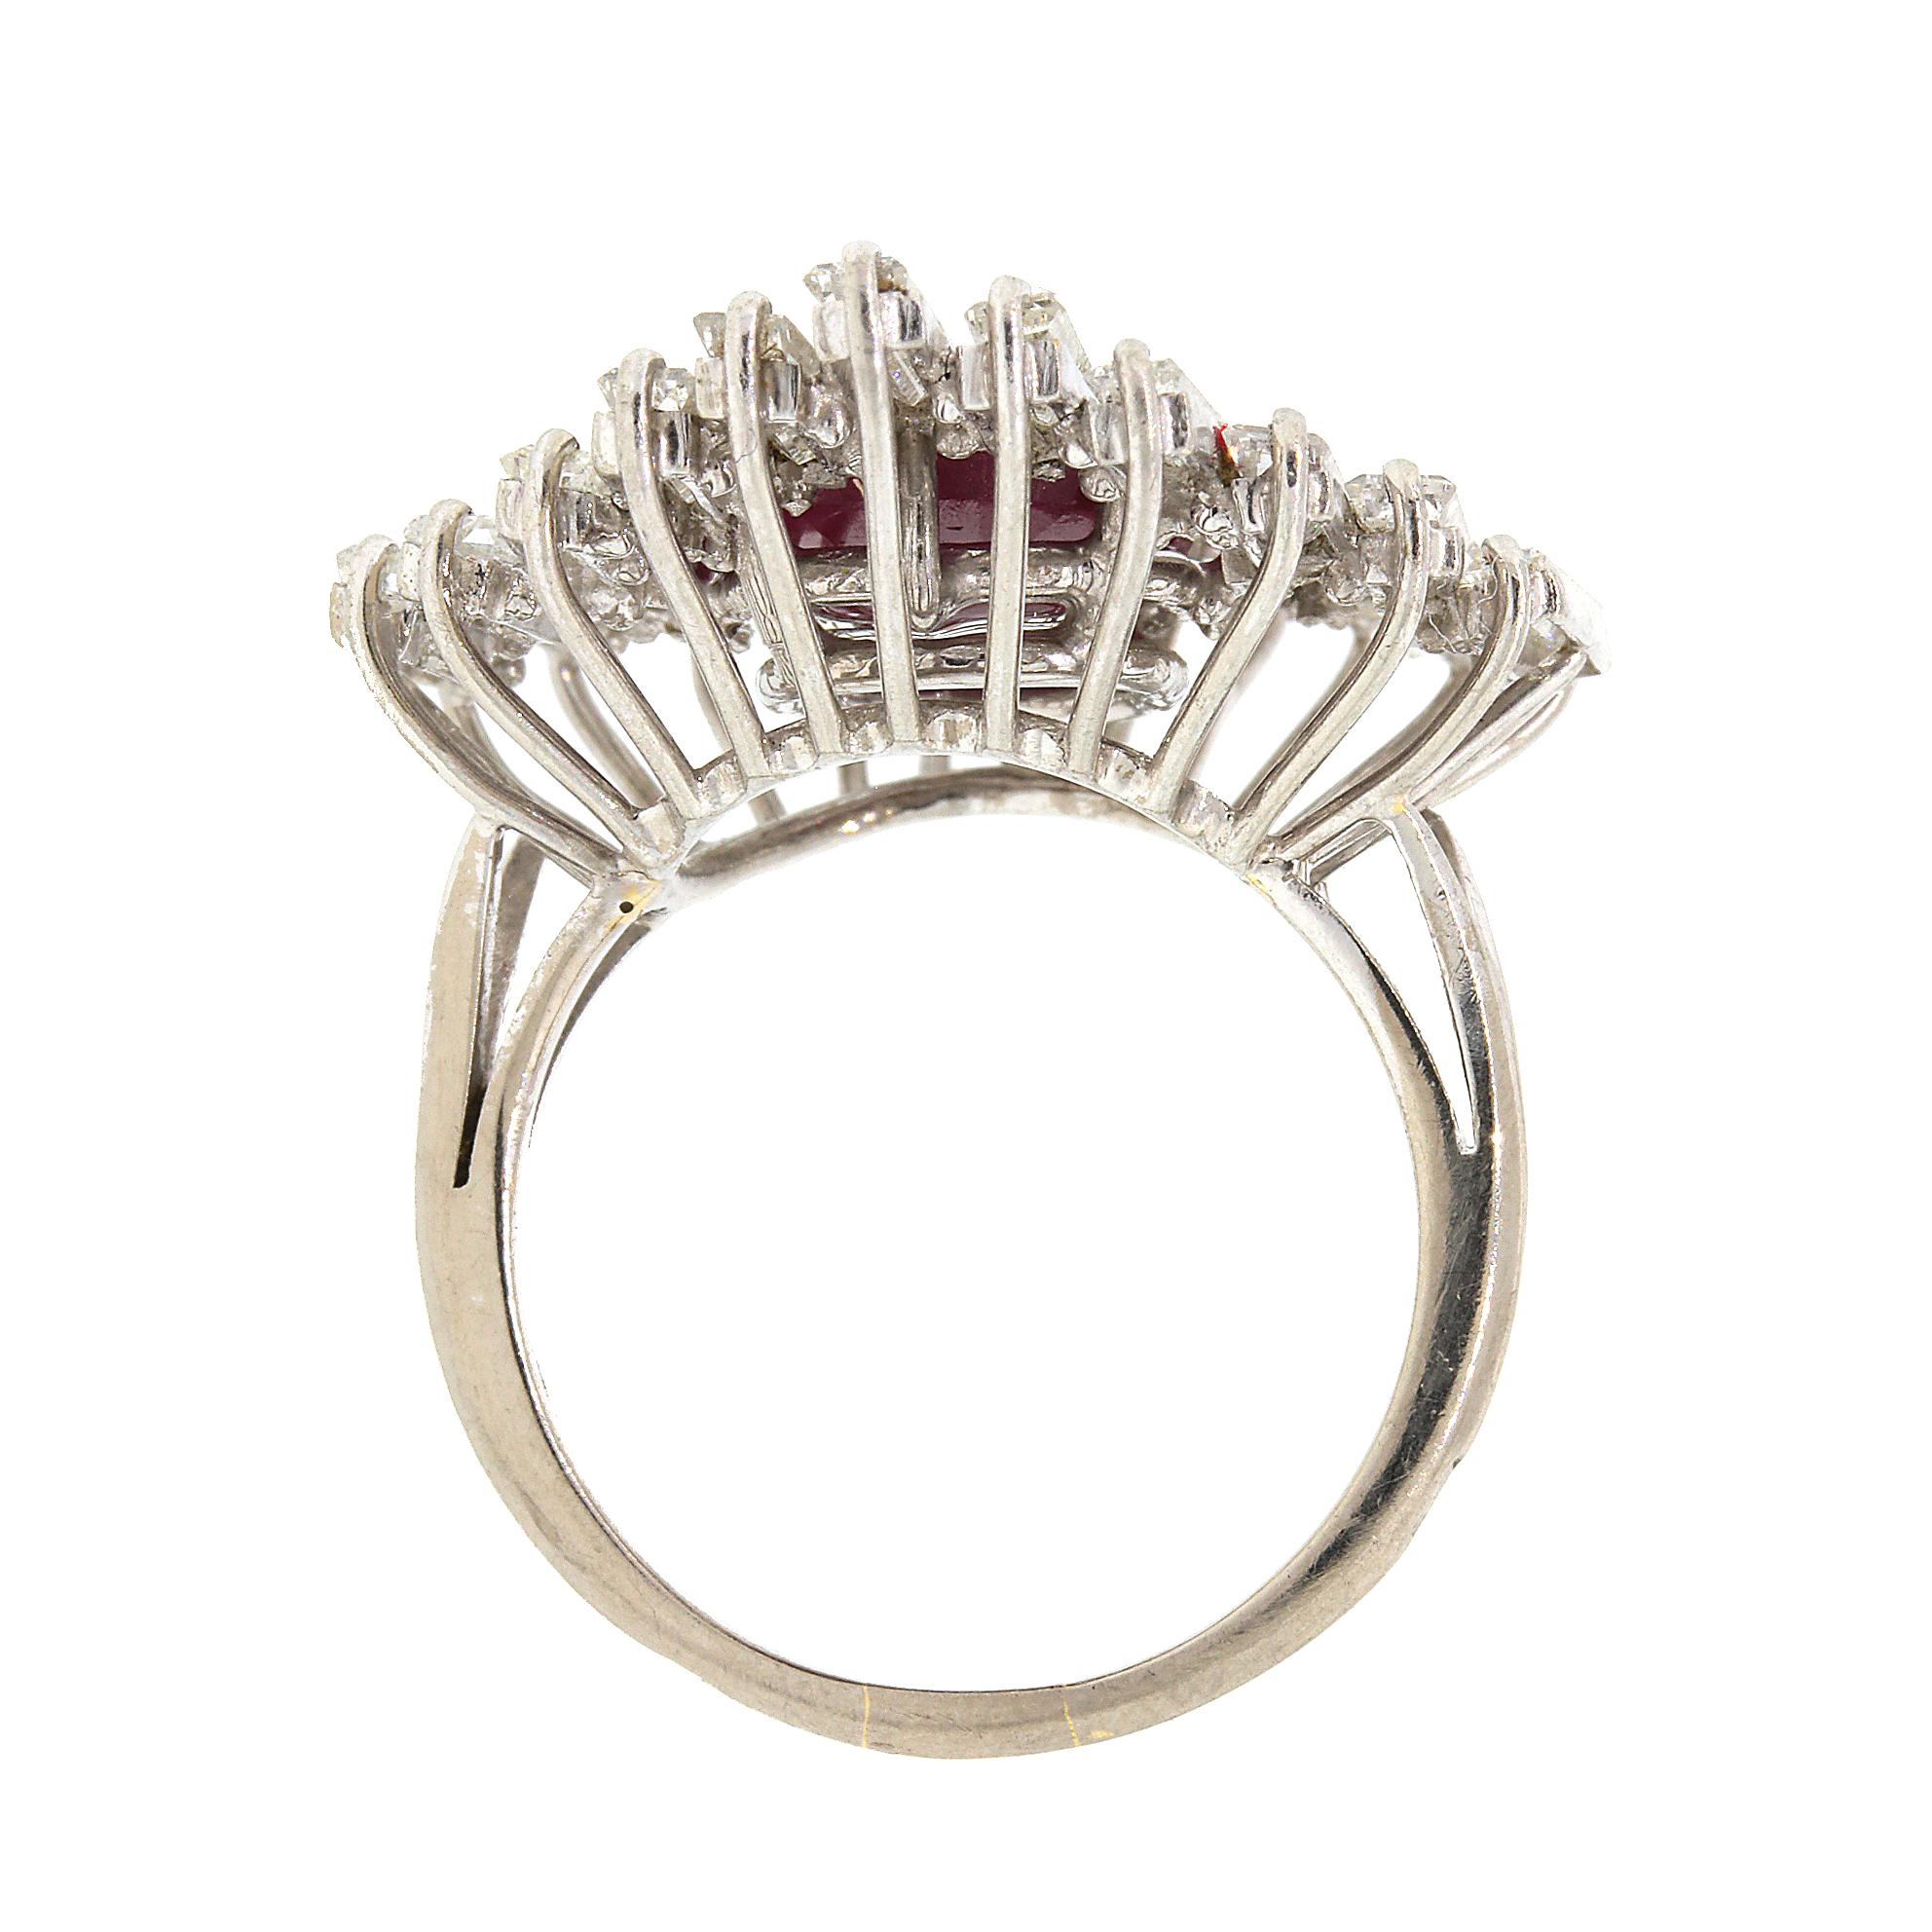 14 kt White Gold
Diamond: 3.50 ct (estimated)
Ruby: 4.00 tcw (estimated)
Ring Size: 7.75 
Total Weight: 12.25 grams